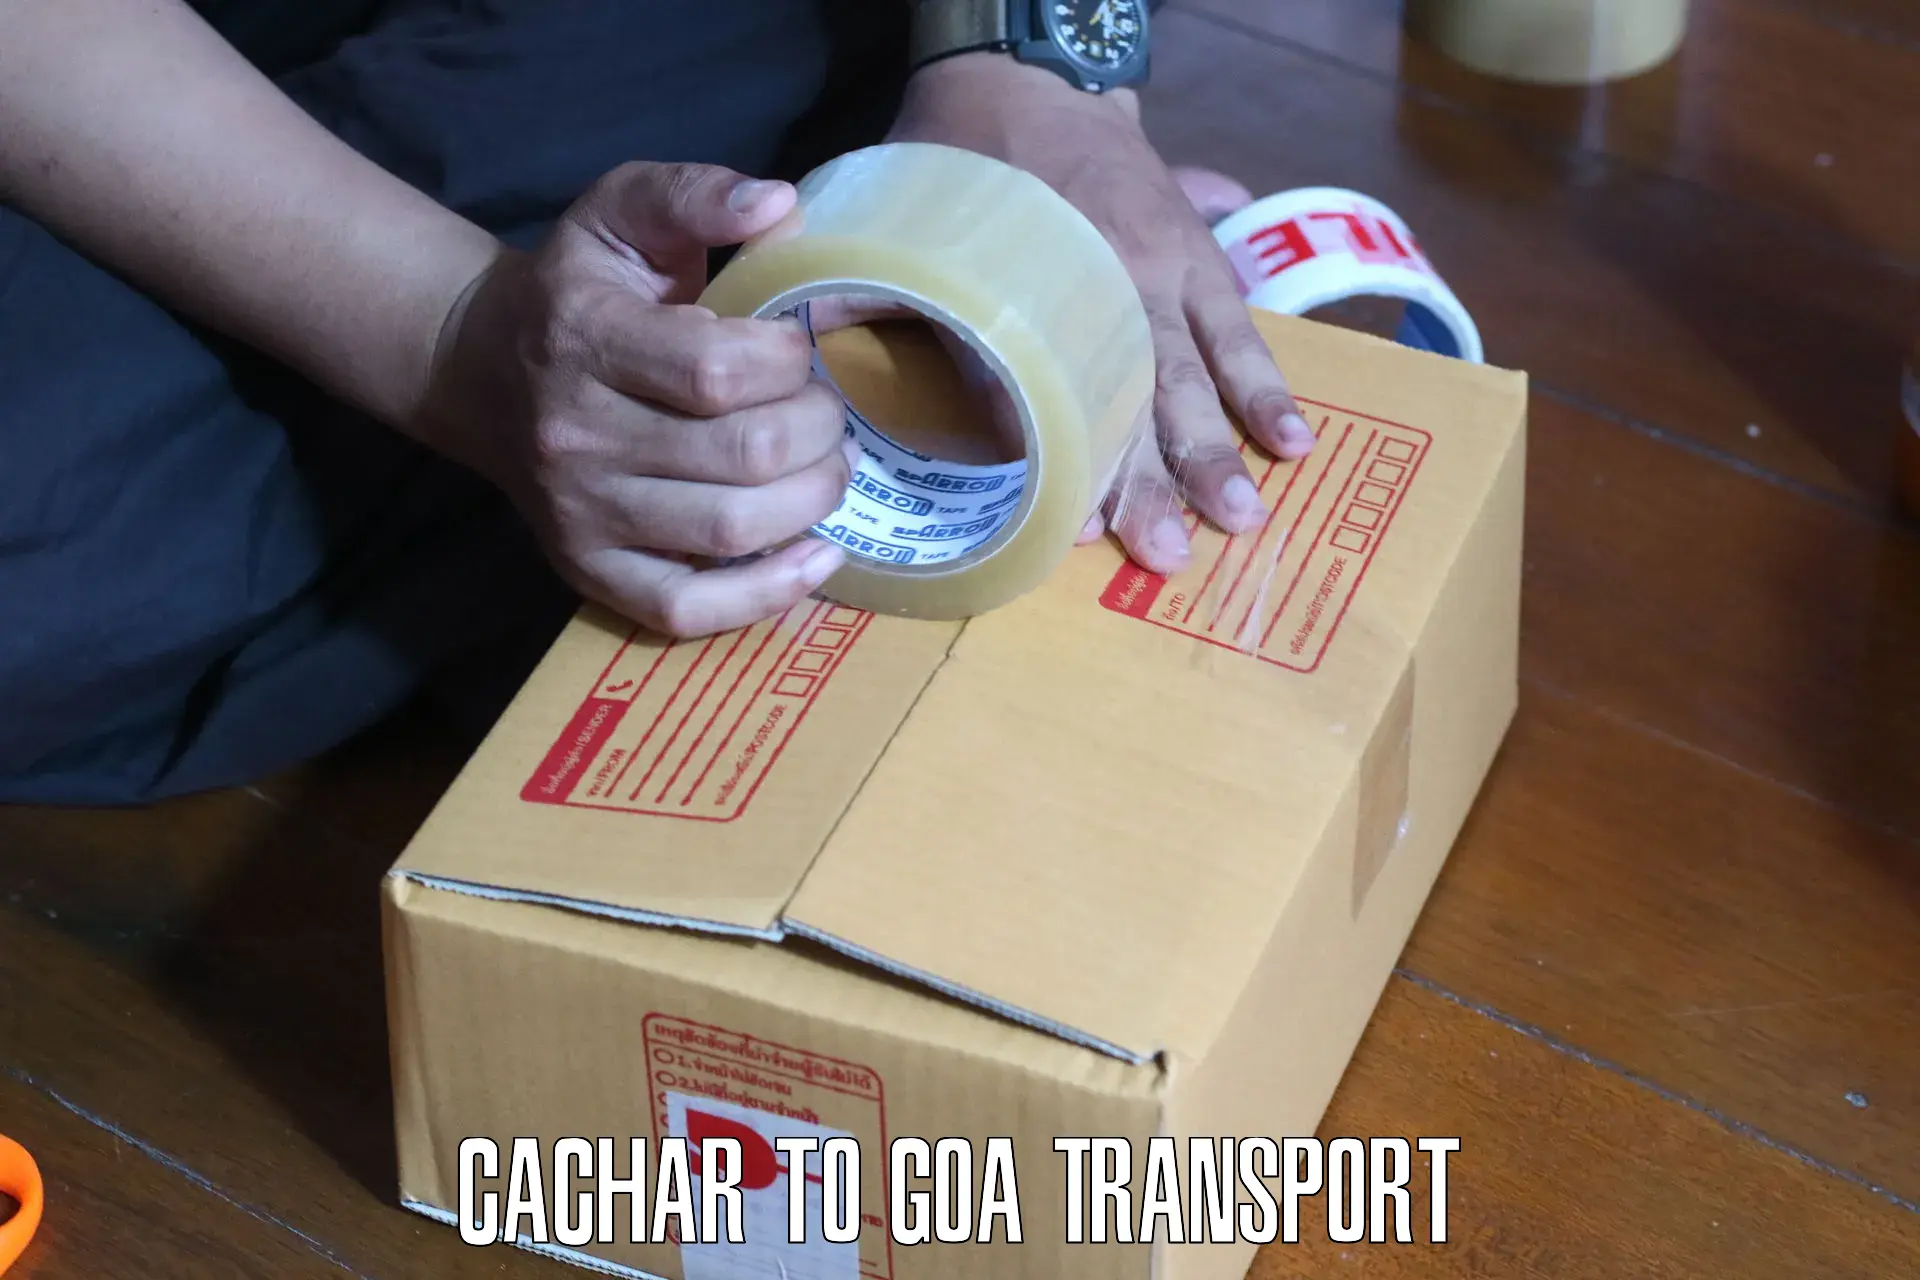 Shipping services Cachar to Panjim